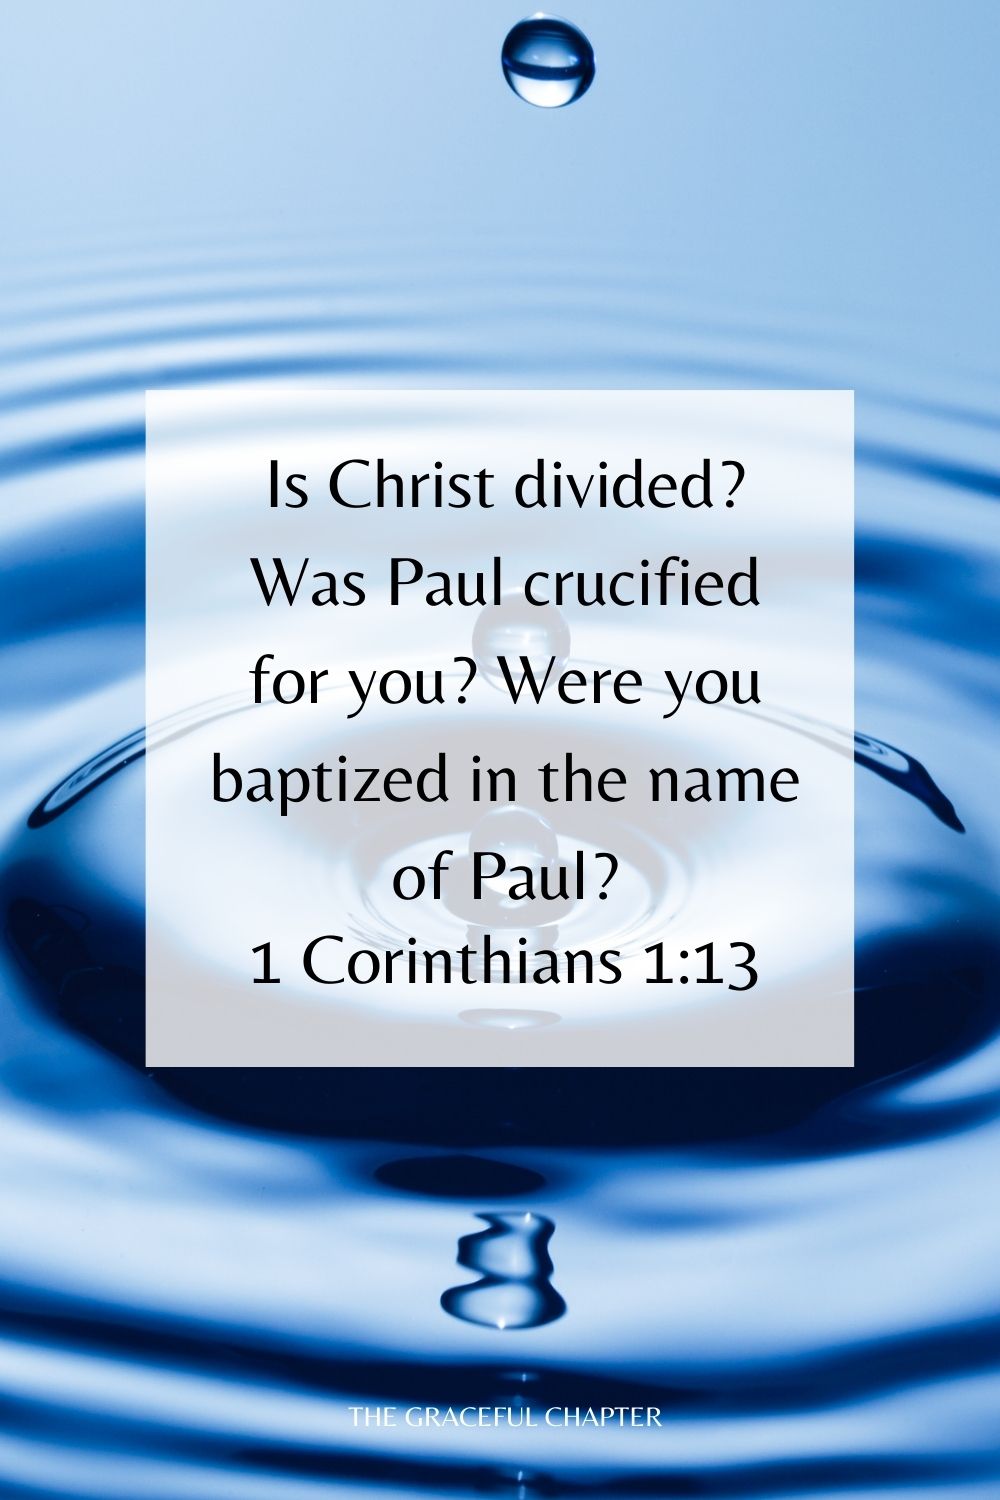 Is Christ divided? Was Paul crucified for you? Were you baptized in the name of Paul? 1 Corinthians 1:13